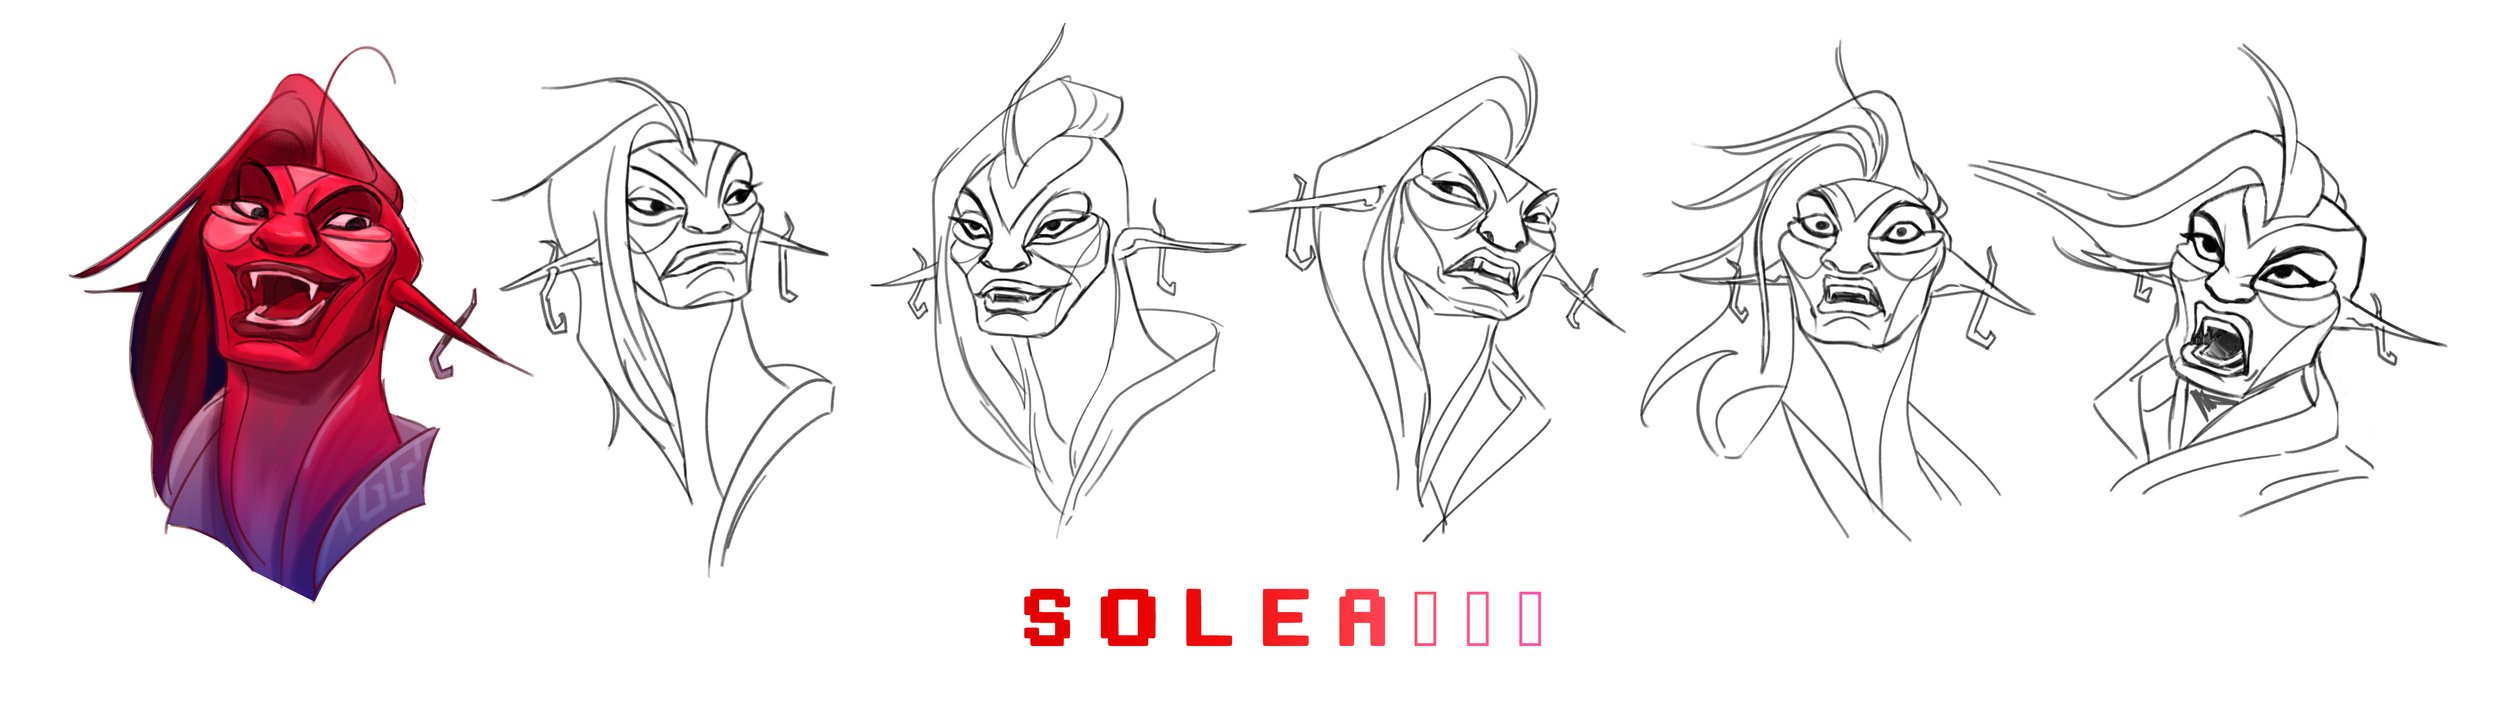 Solea_Expressions_2.0.jpg